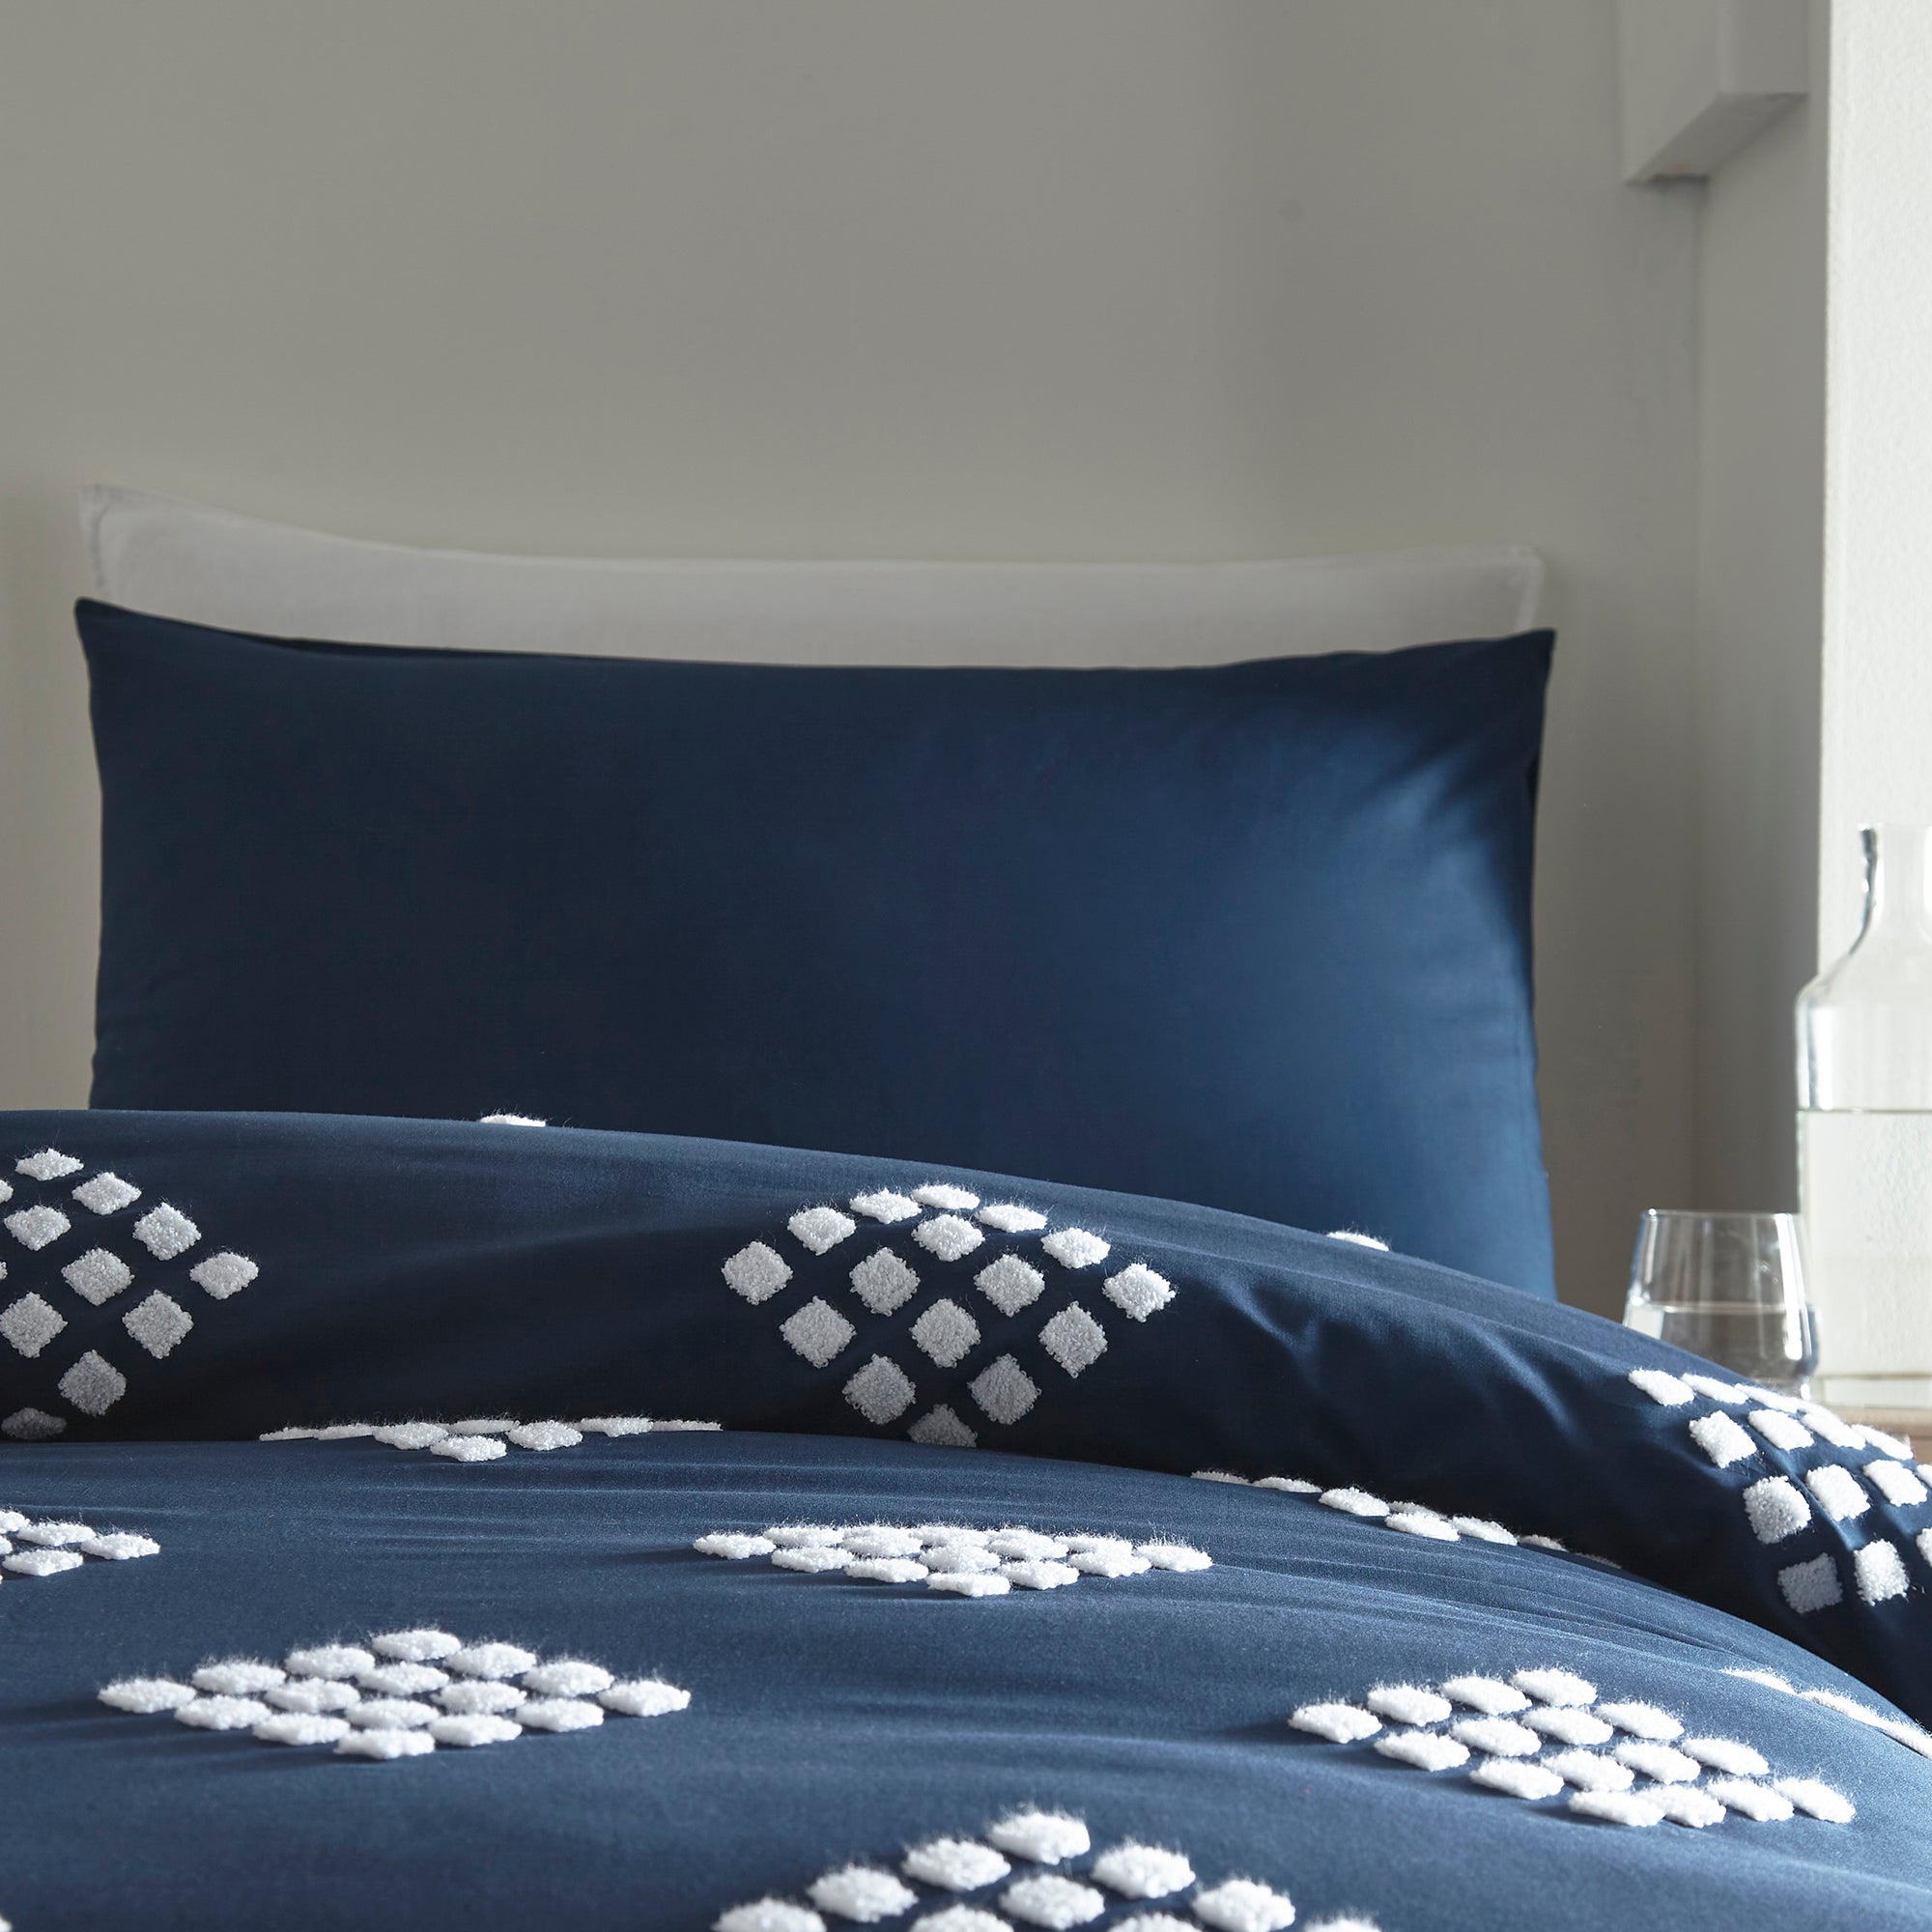 Diamond Tuft - 100% Cotton Duvet Cover Set in Navy - by Appletree Boutique